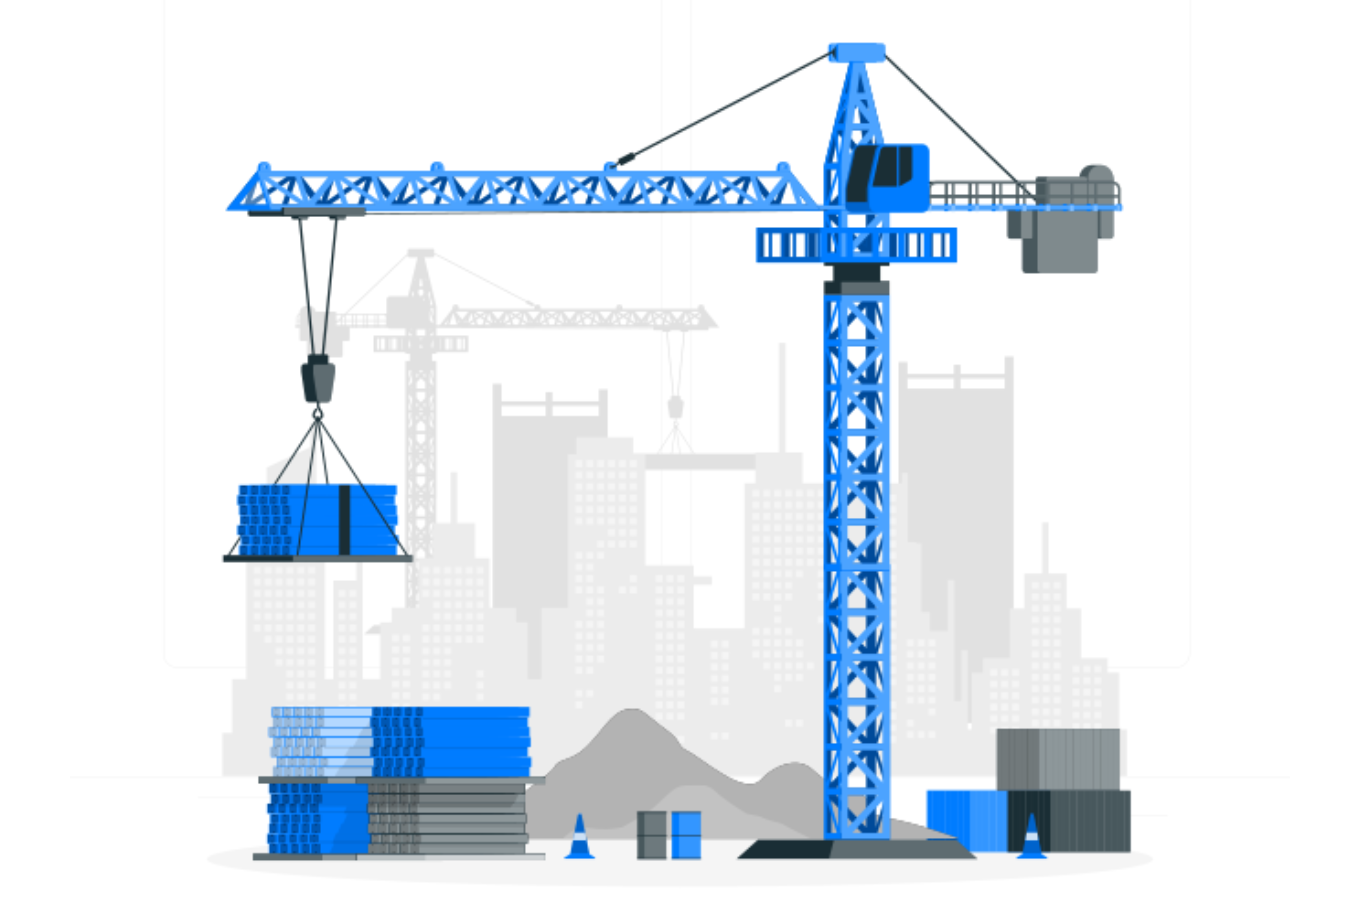 A blue construction crane lifting materials at a construction site, with buildings and construction materials in the background